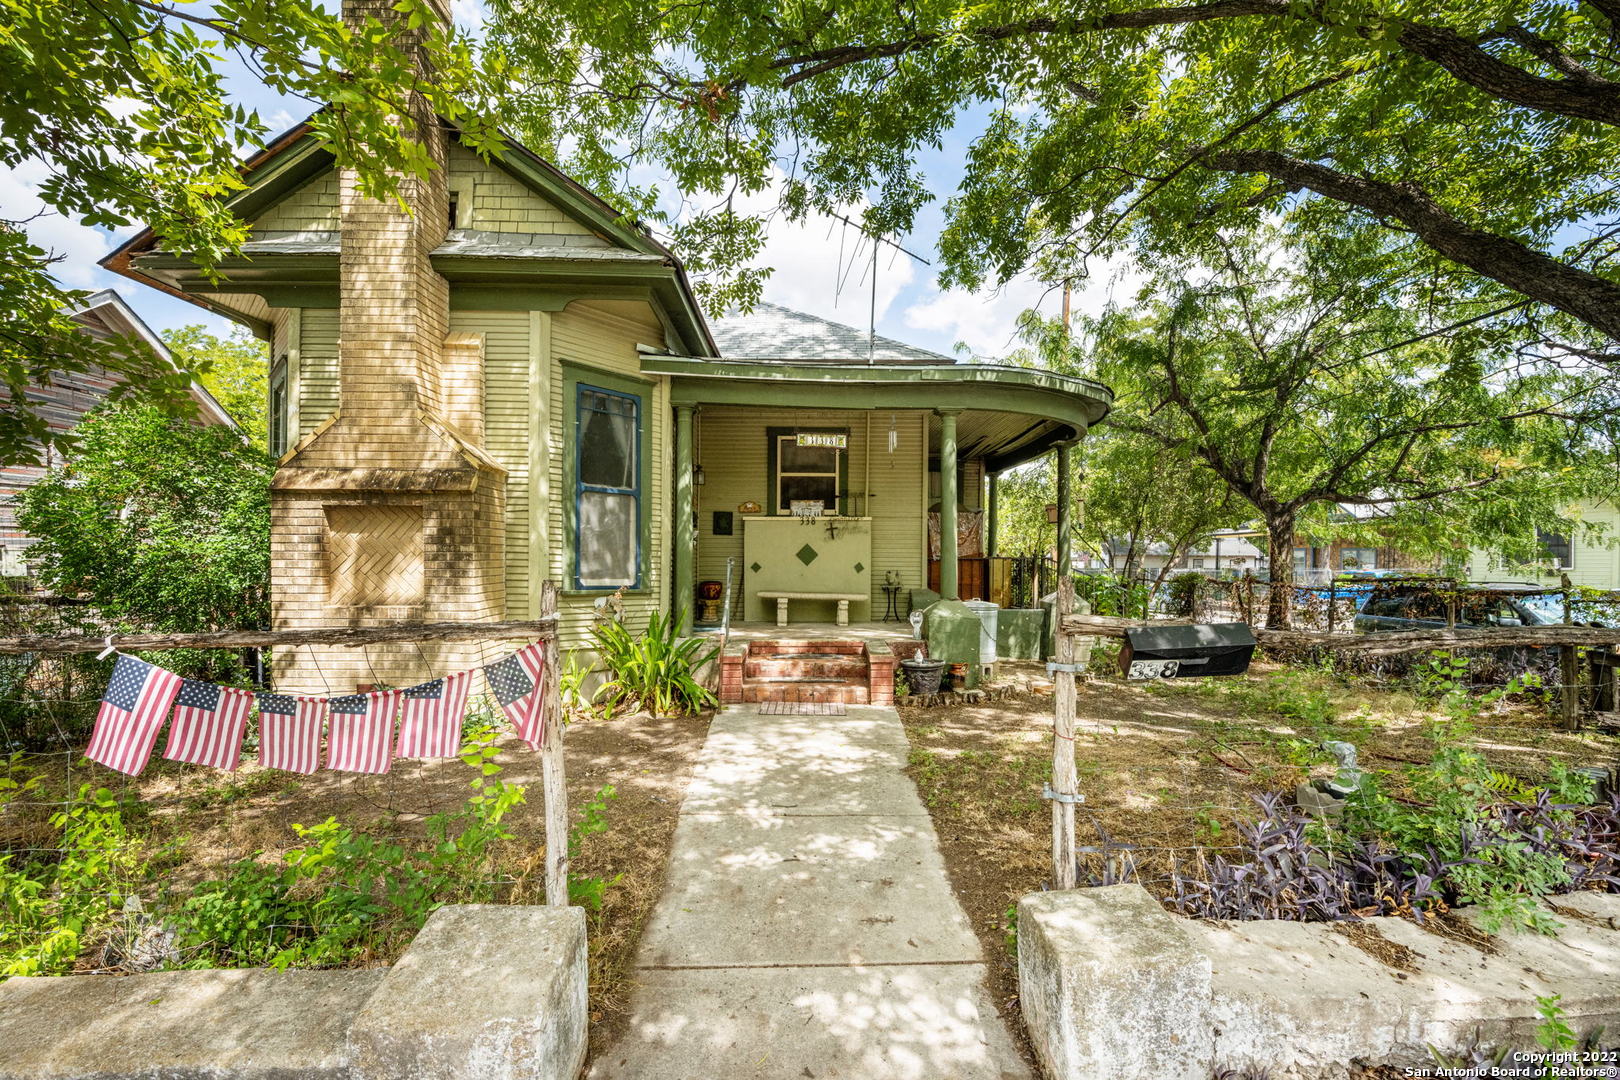 Investor Special! Situated in the historic Beanville Subdivison, bordering Englewood and Southtown this corner lot is plumbed and has electrical for a triplex in the main structure, with an additional 2 bedroom 1 bath structure in the back yard.